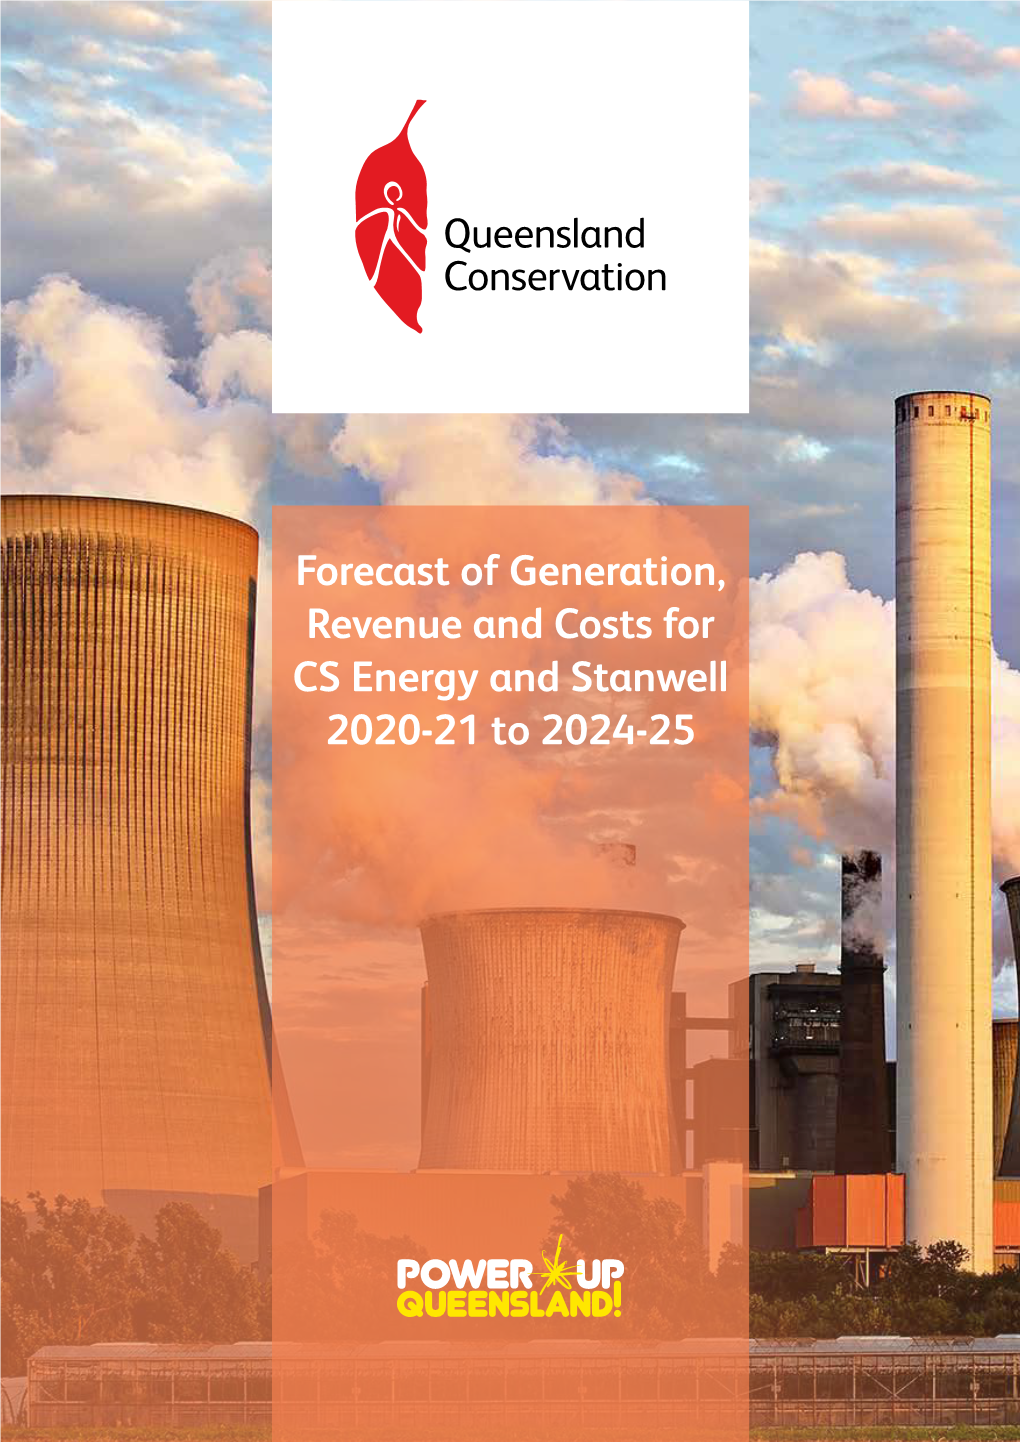 Forecast of Generation, Revenue and Costs for CS Energy and Stanwell 2020-21 to 2024-25